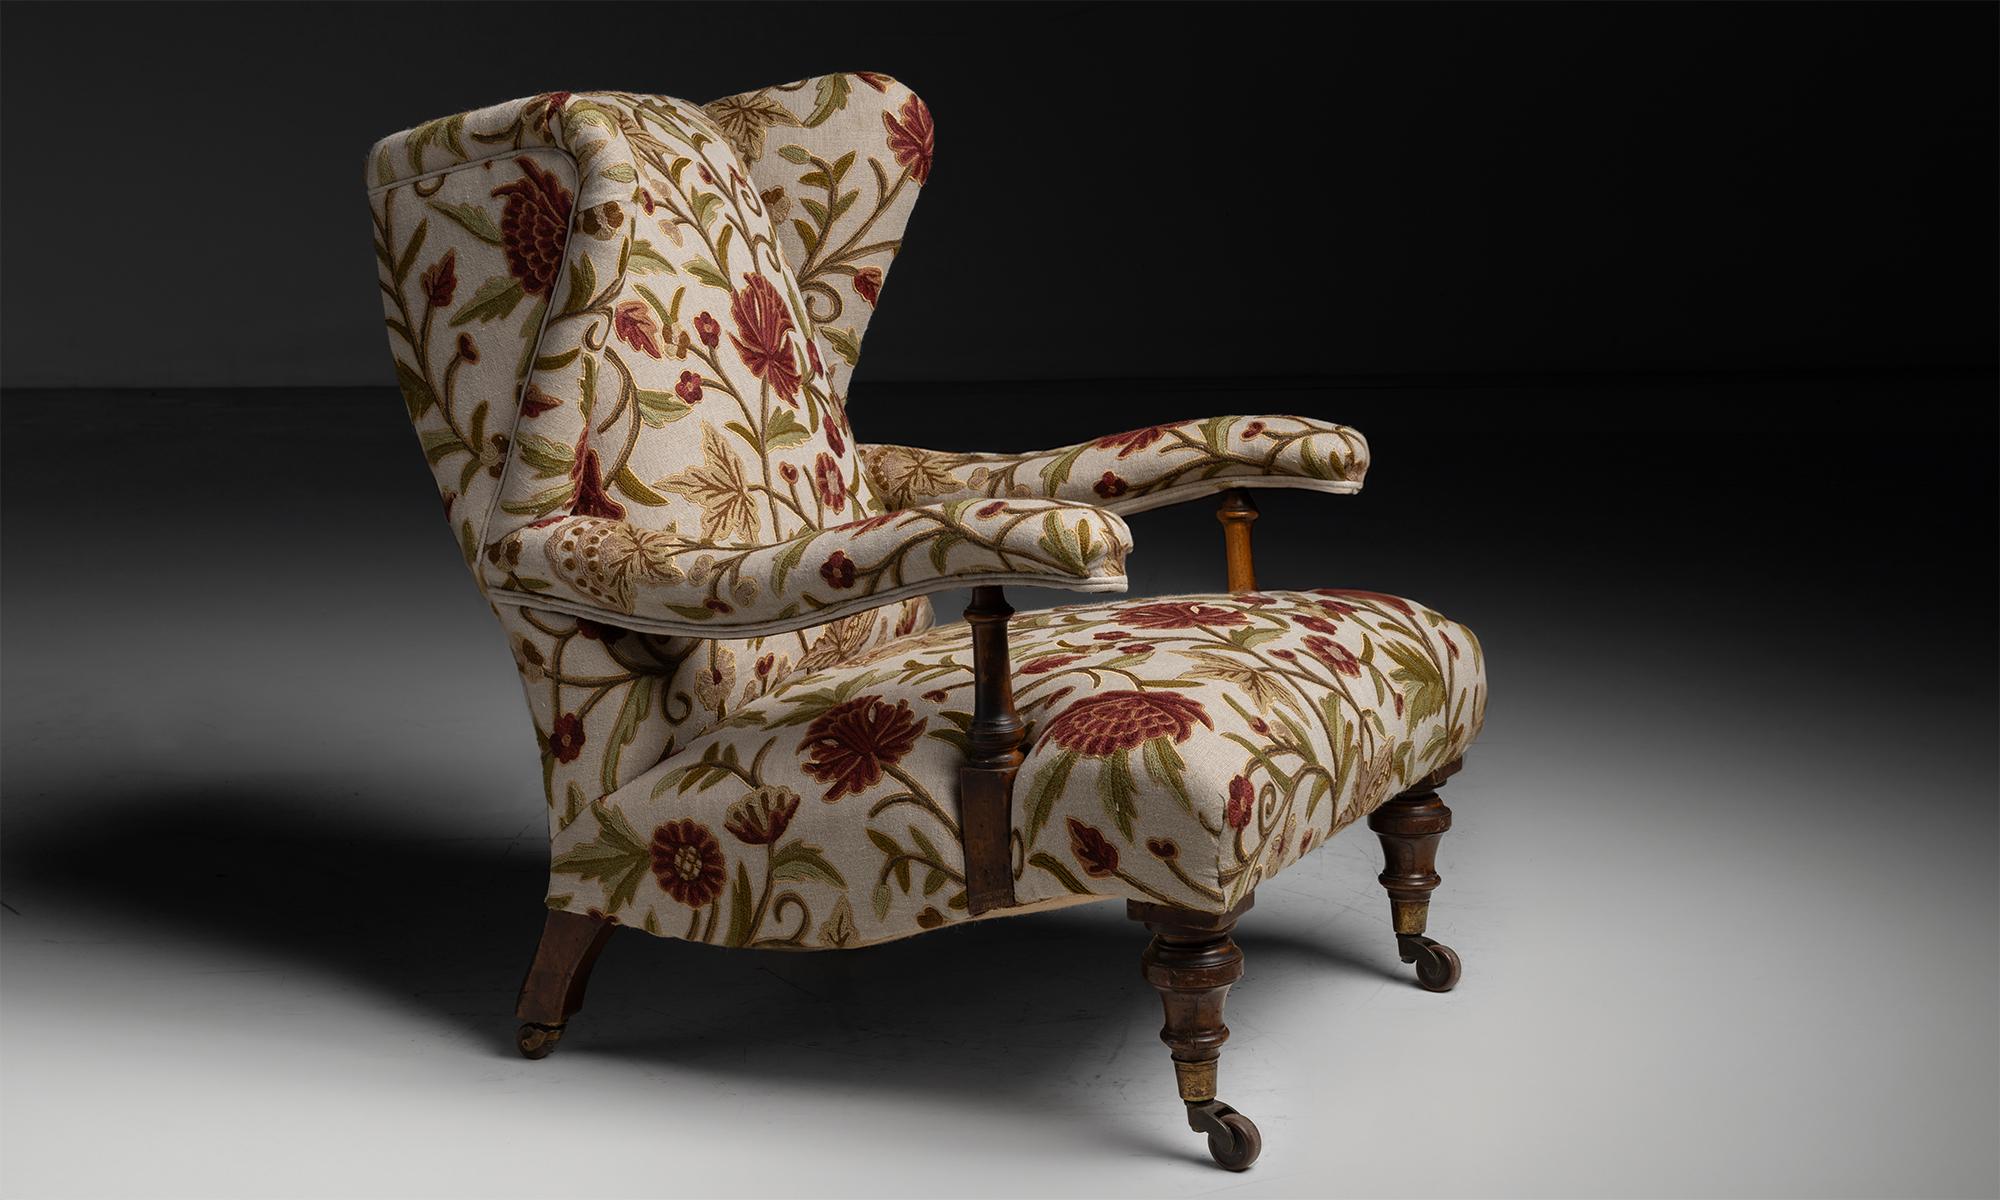 Holland & Sons Wingchair in Embroidered Linen

England circa 1900

Newly upholstered in embroidered linen by Marvin. turned mahogany legs with original castors.

27.5”w x 31”d x 35.5”h x 16”seat